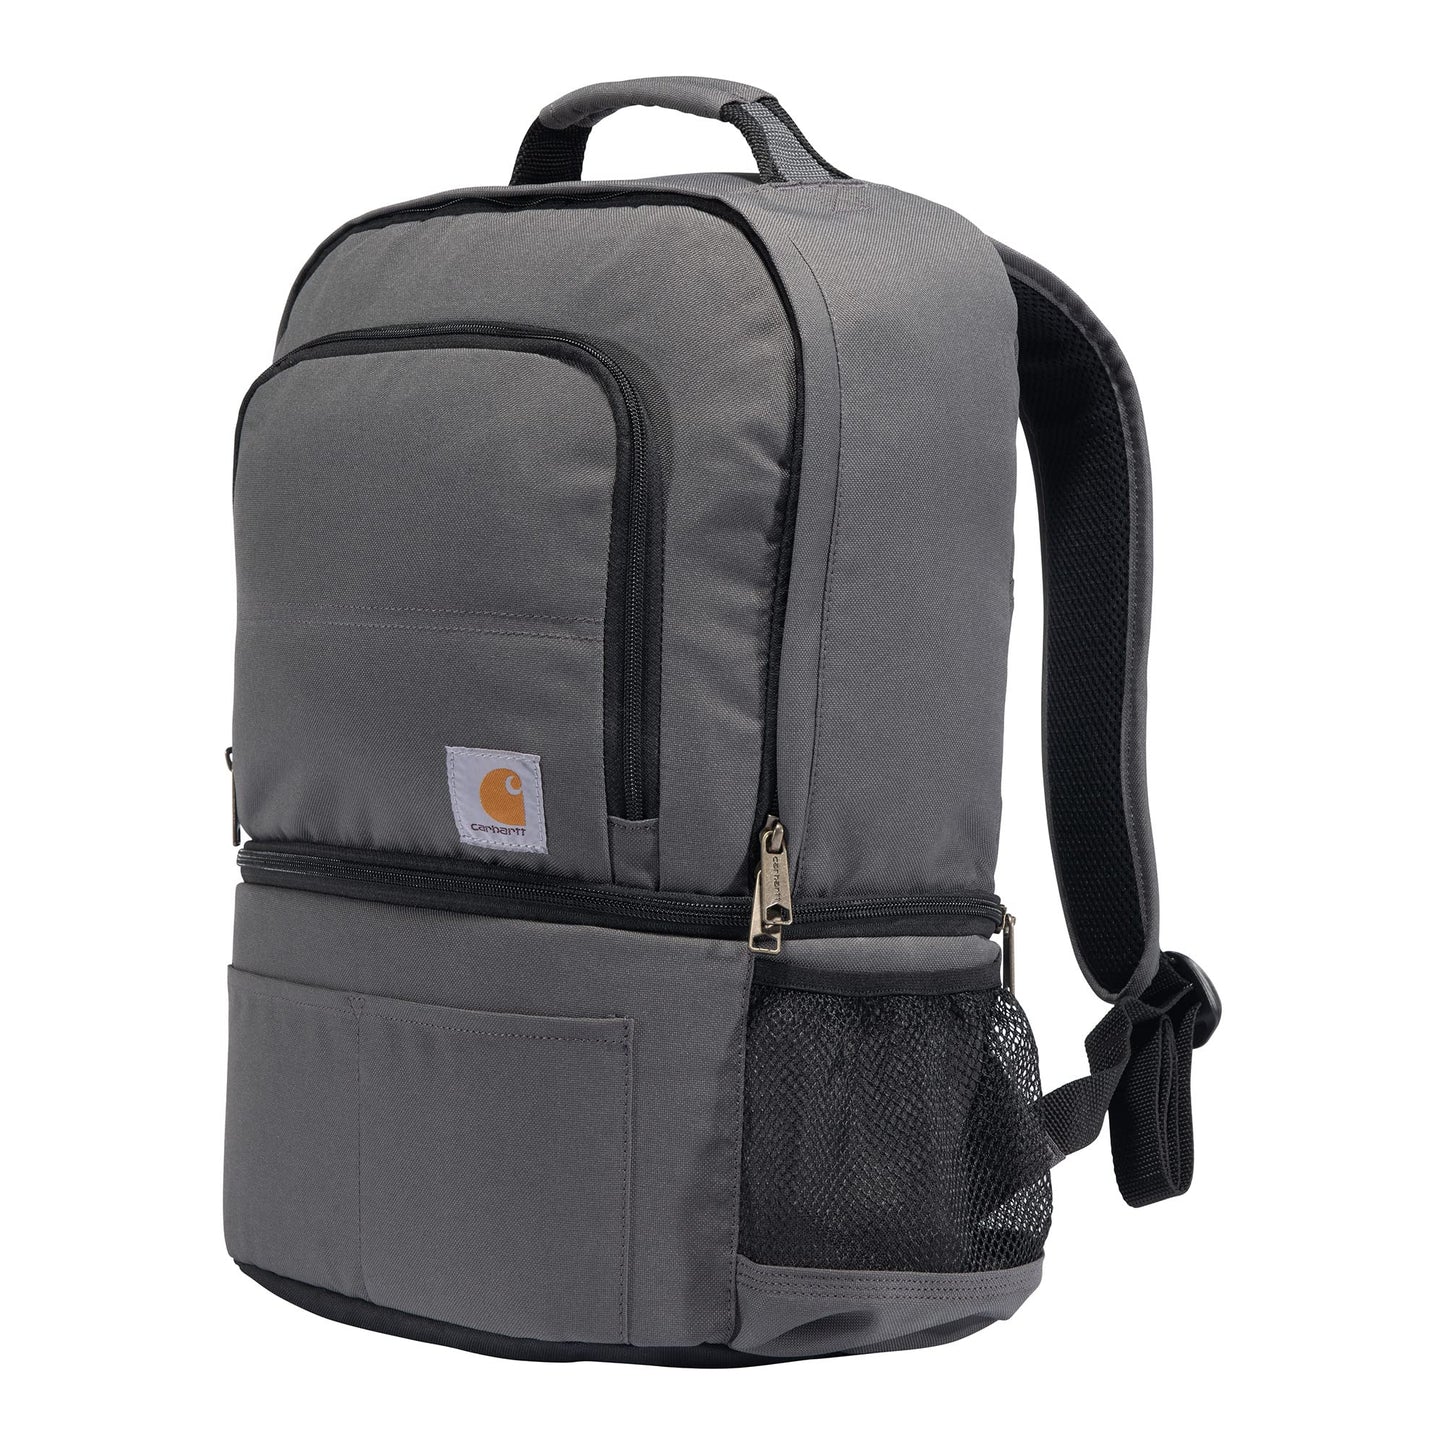 Carhartt Unisex Insulated Two Compartment 24-Can Cooler Backpack